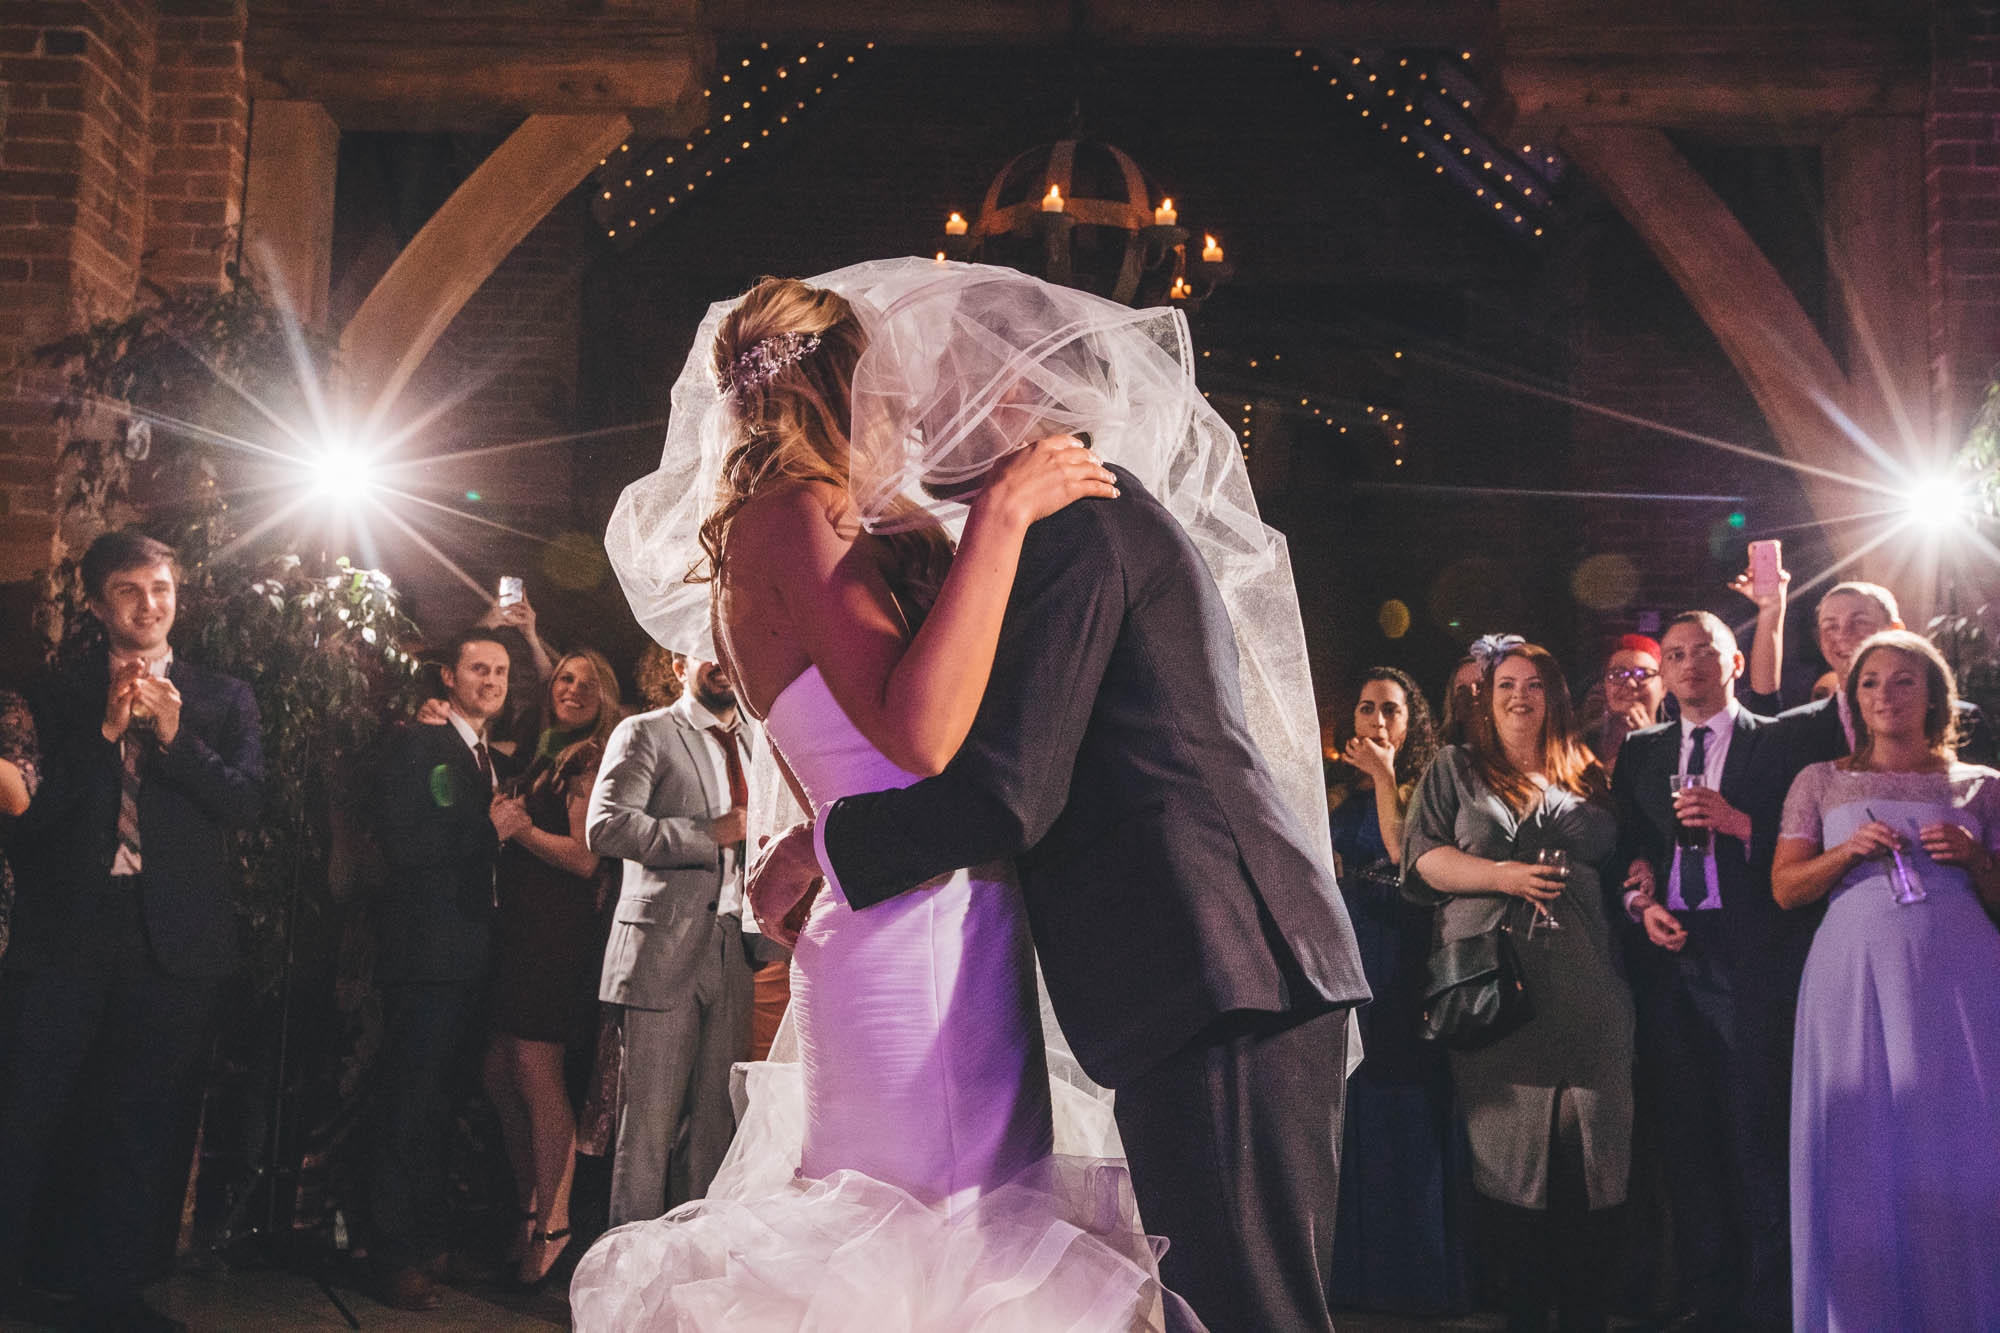 Newlyweds share a kiss under the veil in rustic barn and guests look on